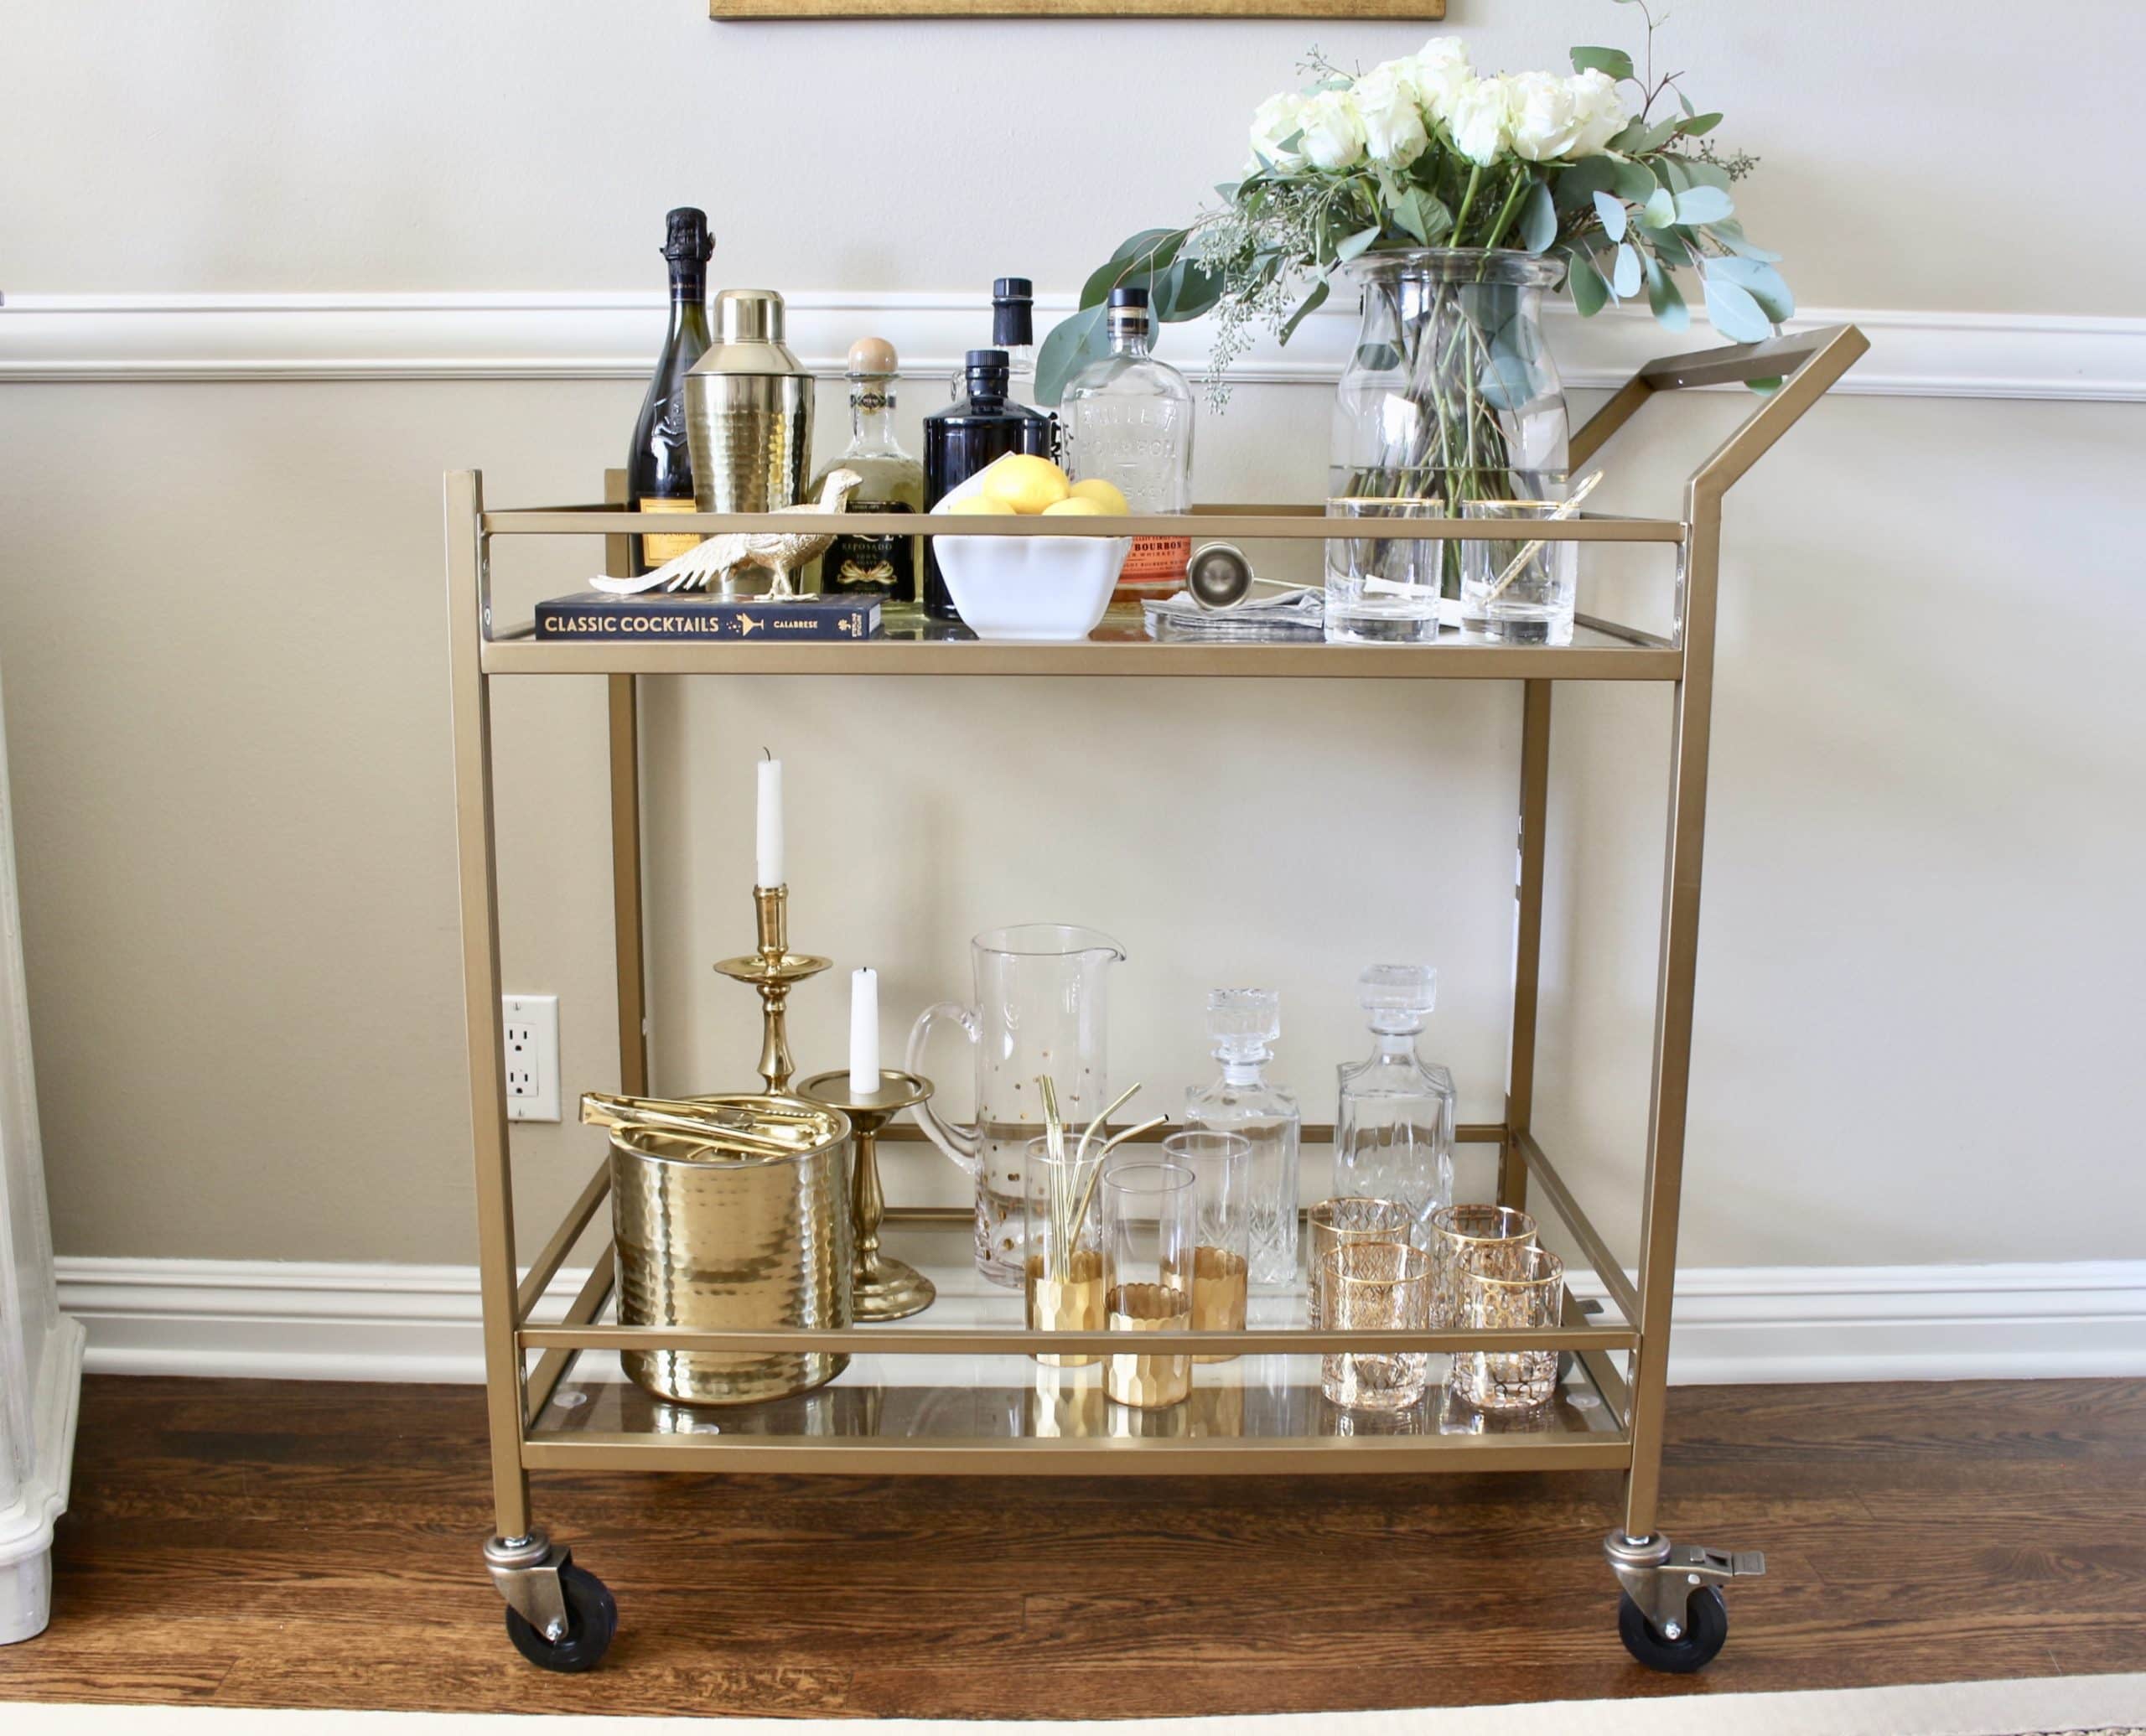 How To Build A Bar Cart From Scratch